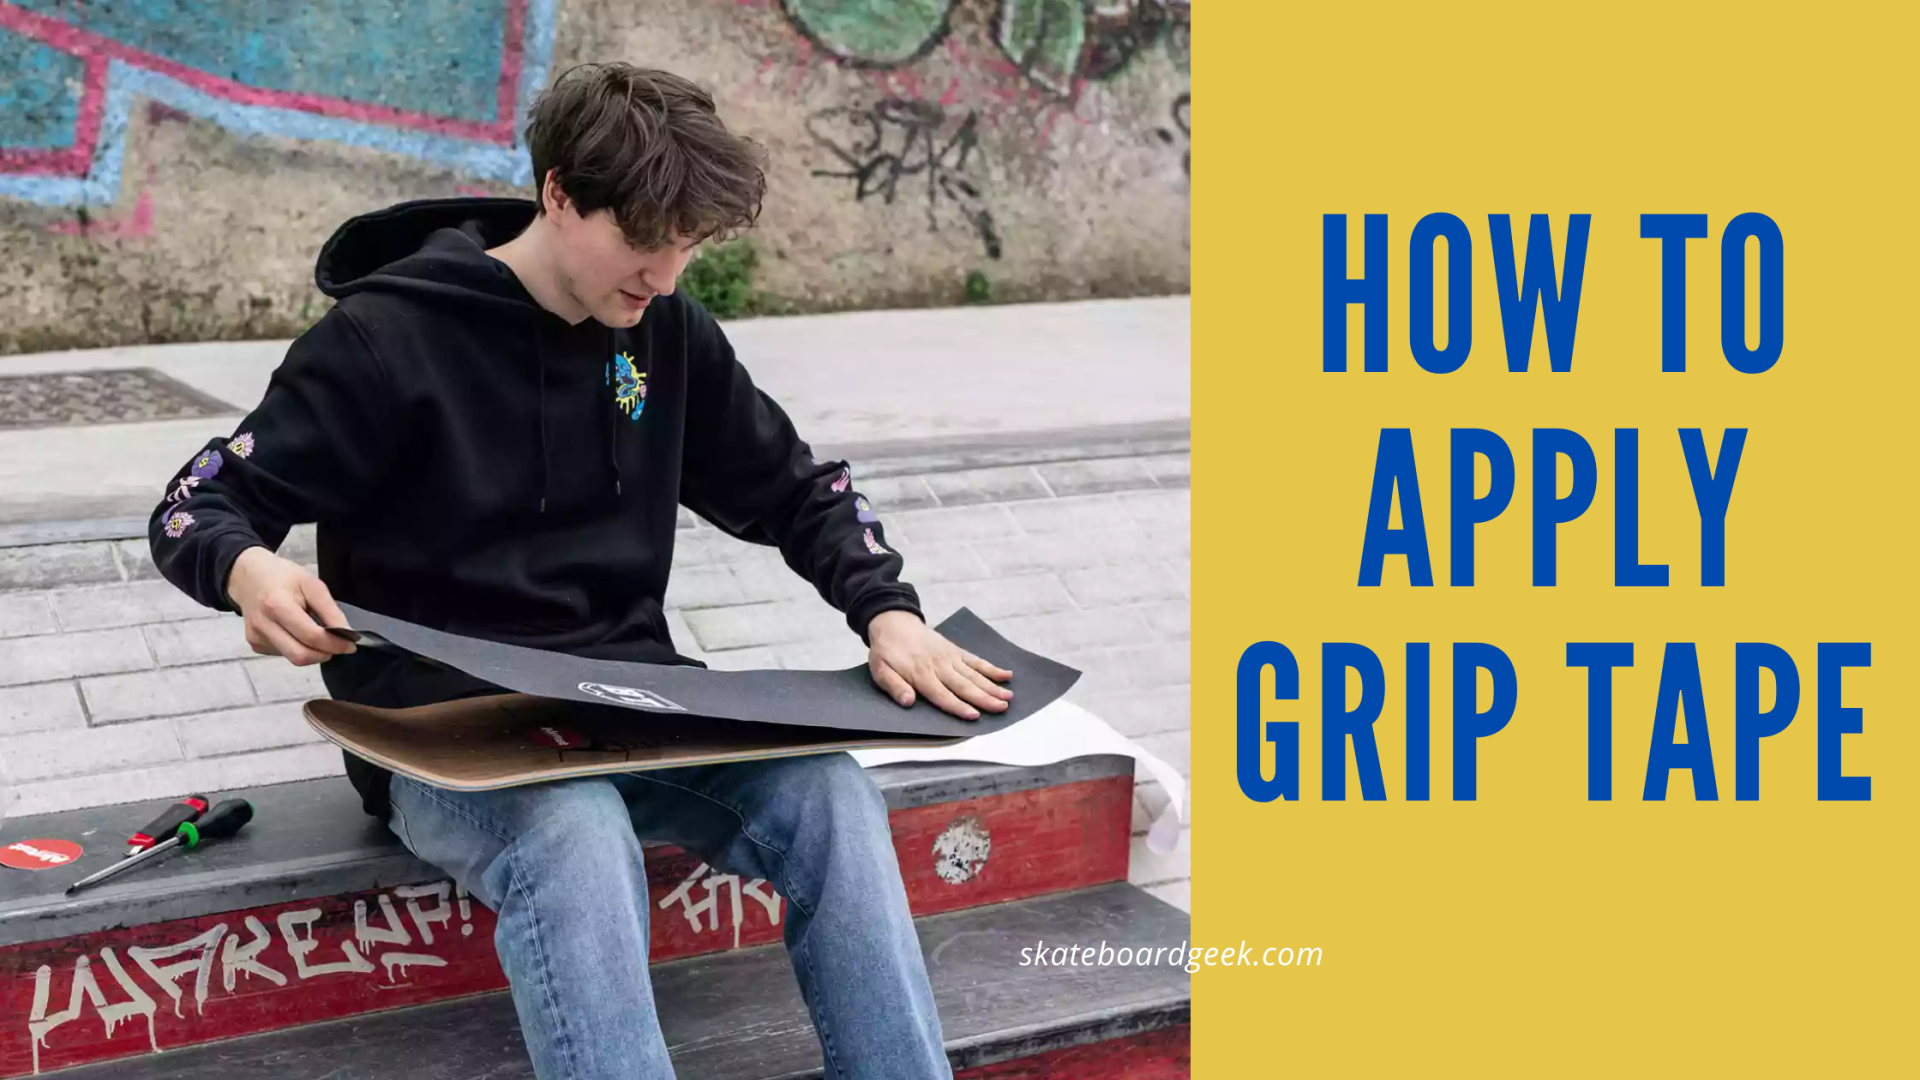 How to Apply Grip Tape